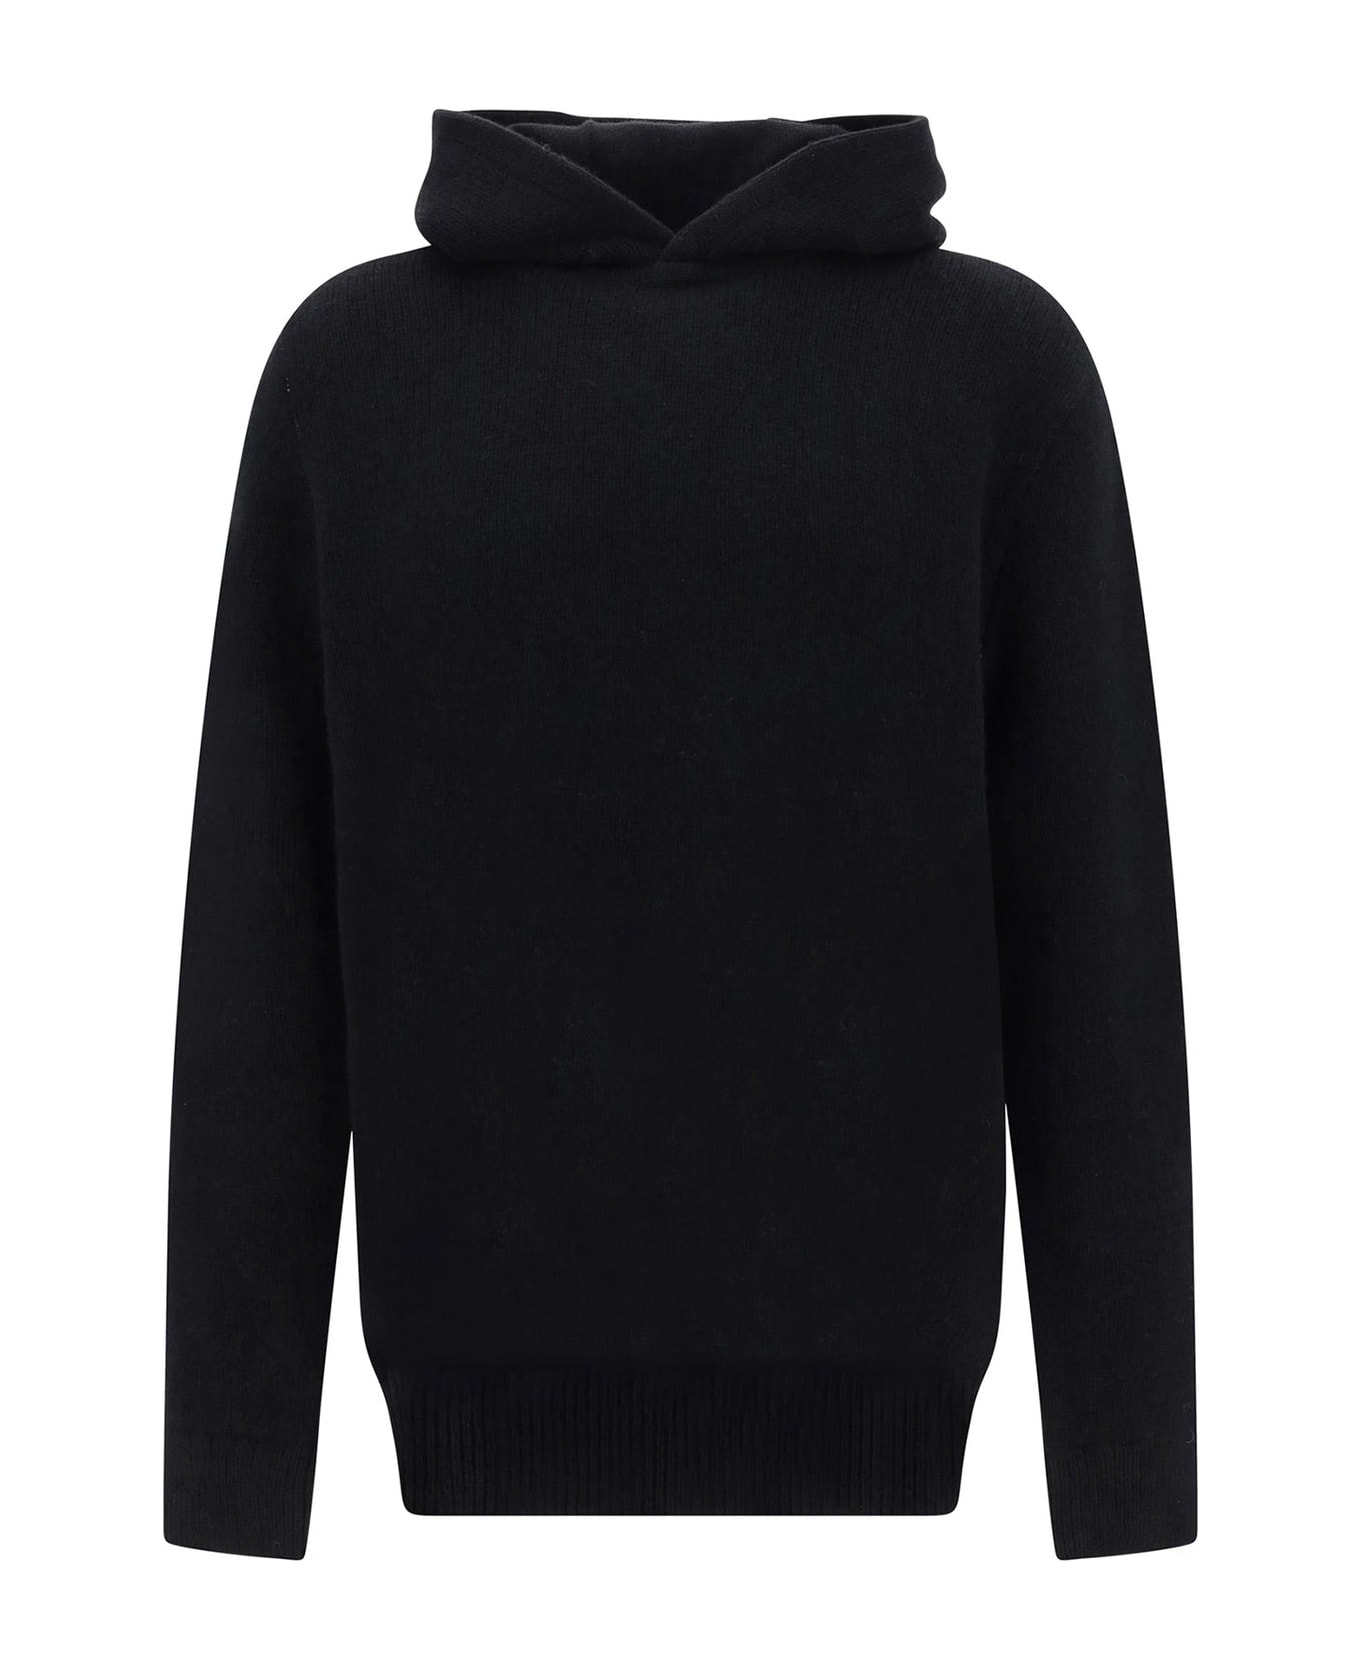 Burberry Forister Knitted Hoodie - Black